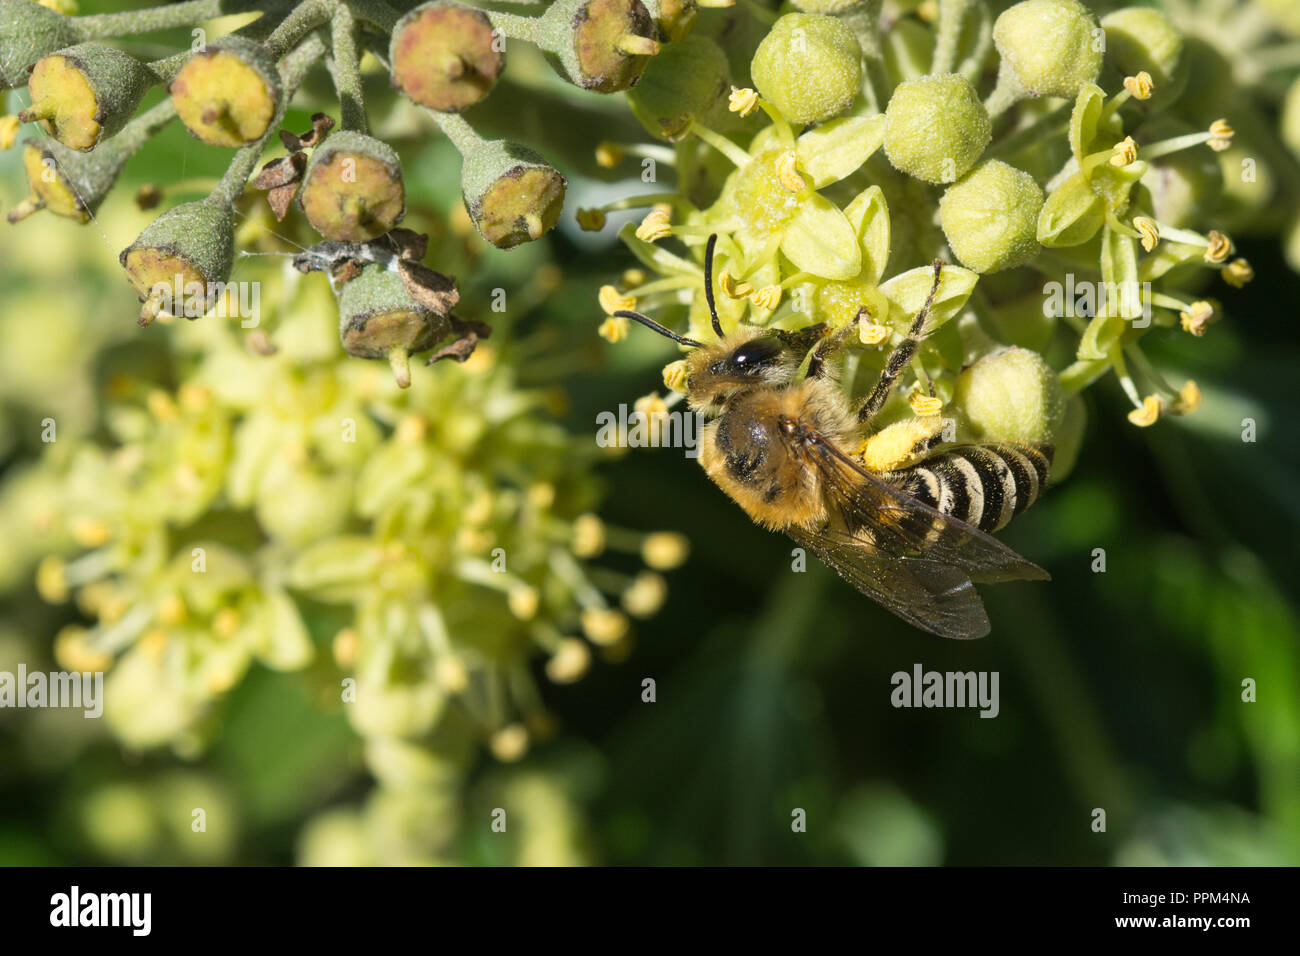 Ivy bee (Colletes hederae) feeding on nectar of ivy flowers (Hedera helix) in late September and collecting pollen, England, UK Stock Photo